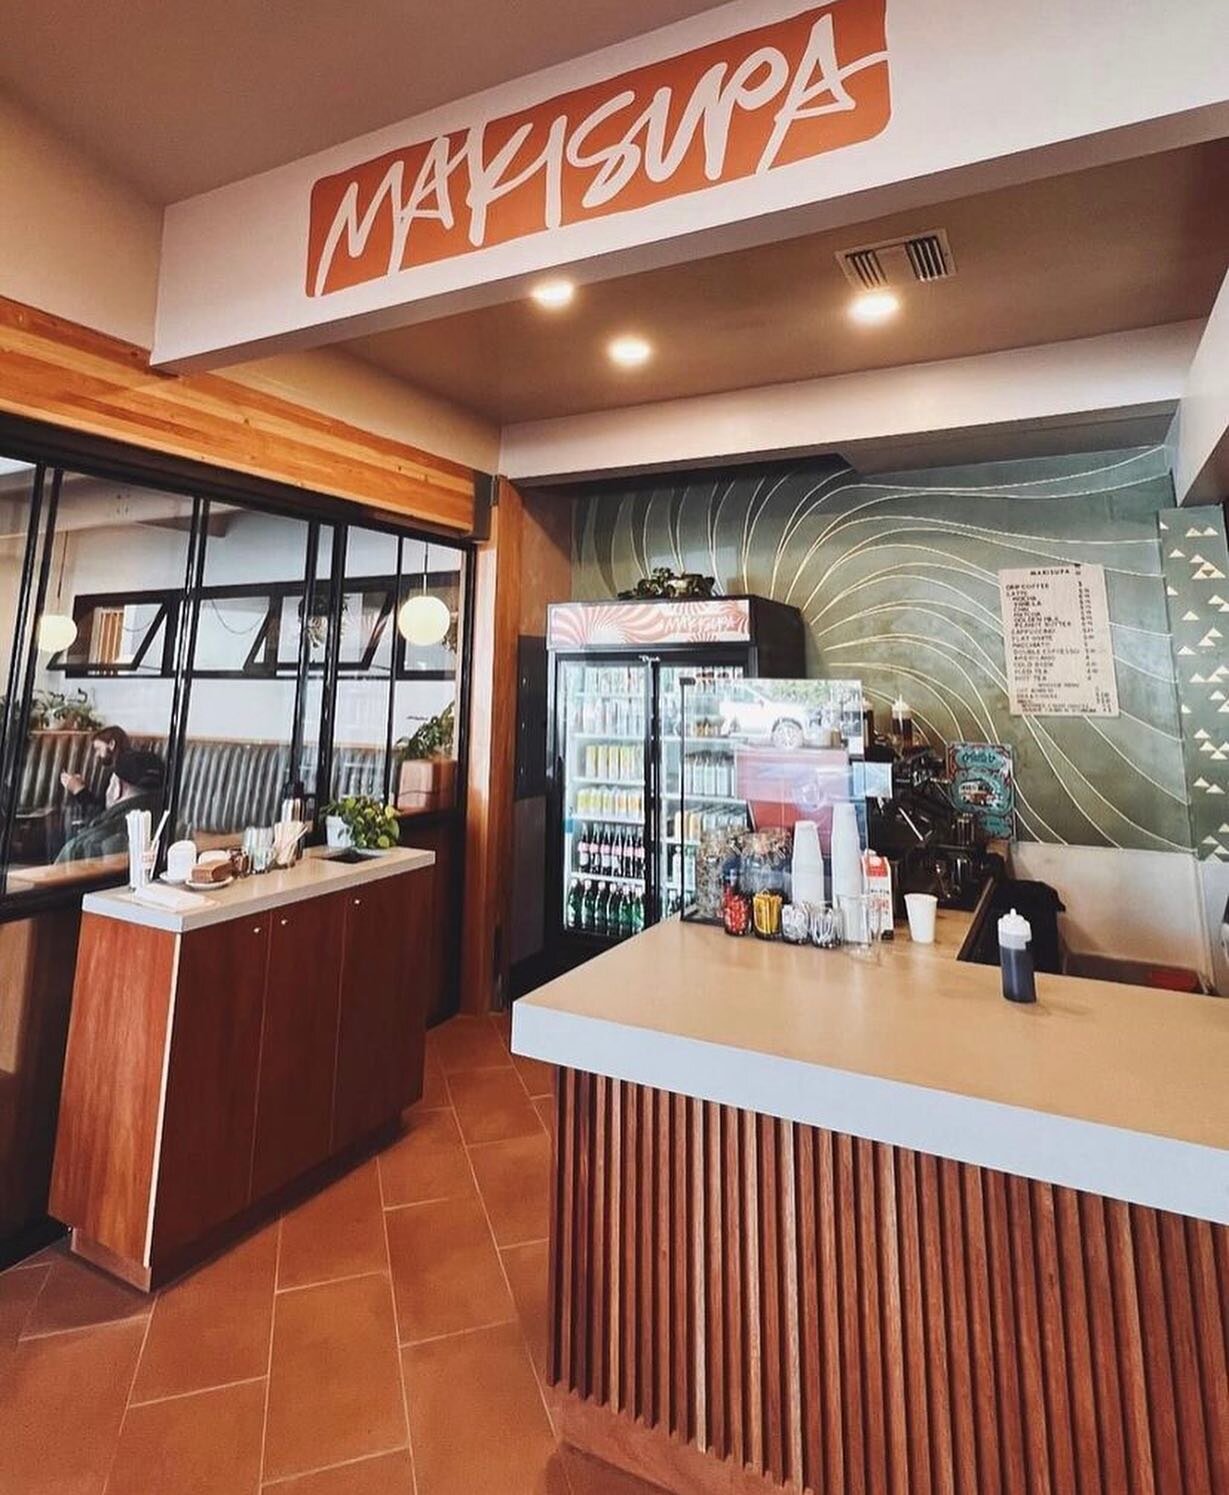 ☕️ 🥐 Dine to Donate ☕️ 🥮 
Please come support our next Dine and Donate on Monday March 25th at Makisupa Coffee Bar. Makisupa is owned by El Rio parents, Howie Goldklang and Carla Flynn, it just opened in Silverlake and is already creating a buzz fo